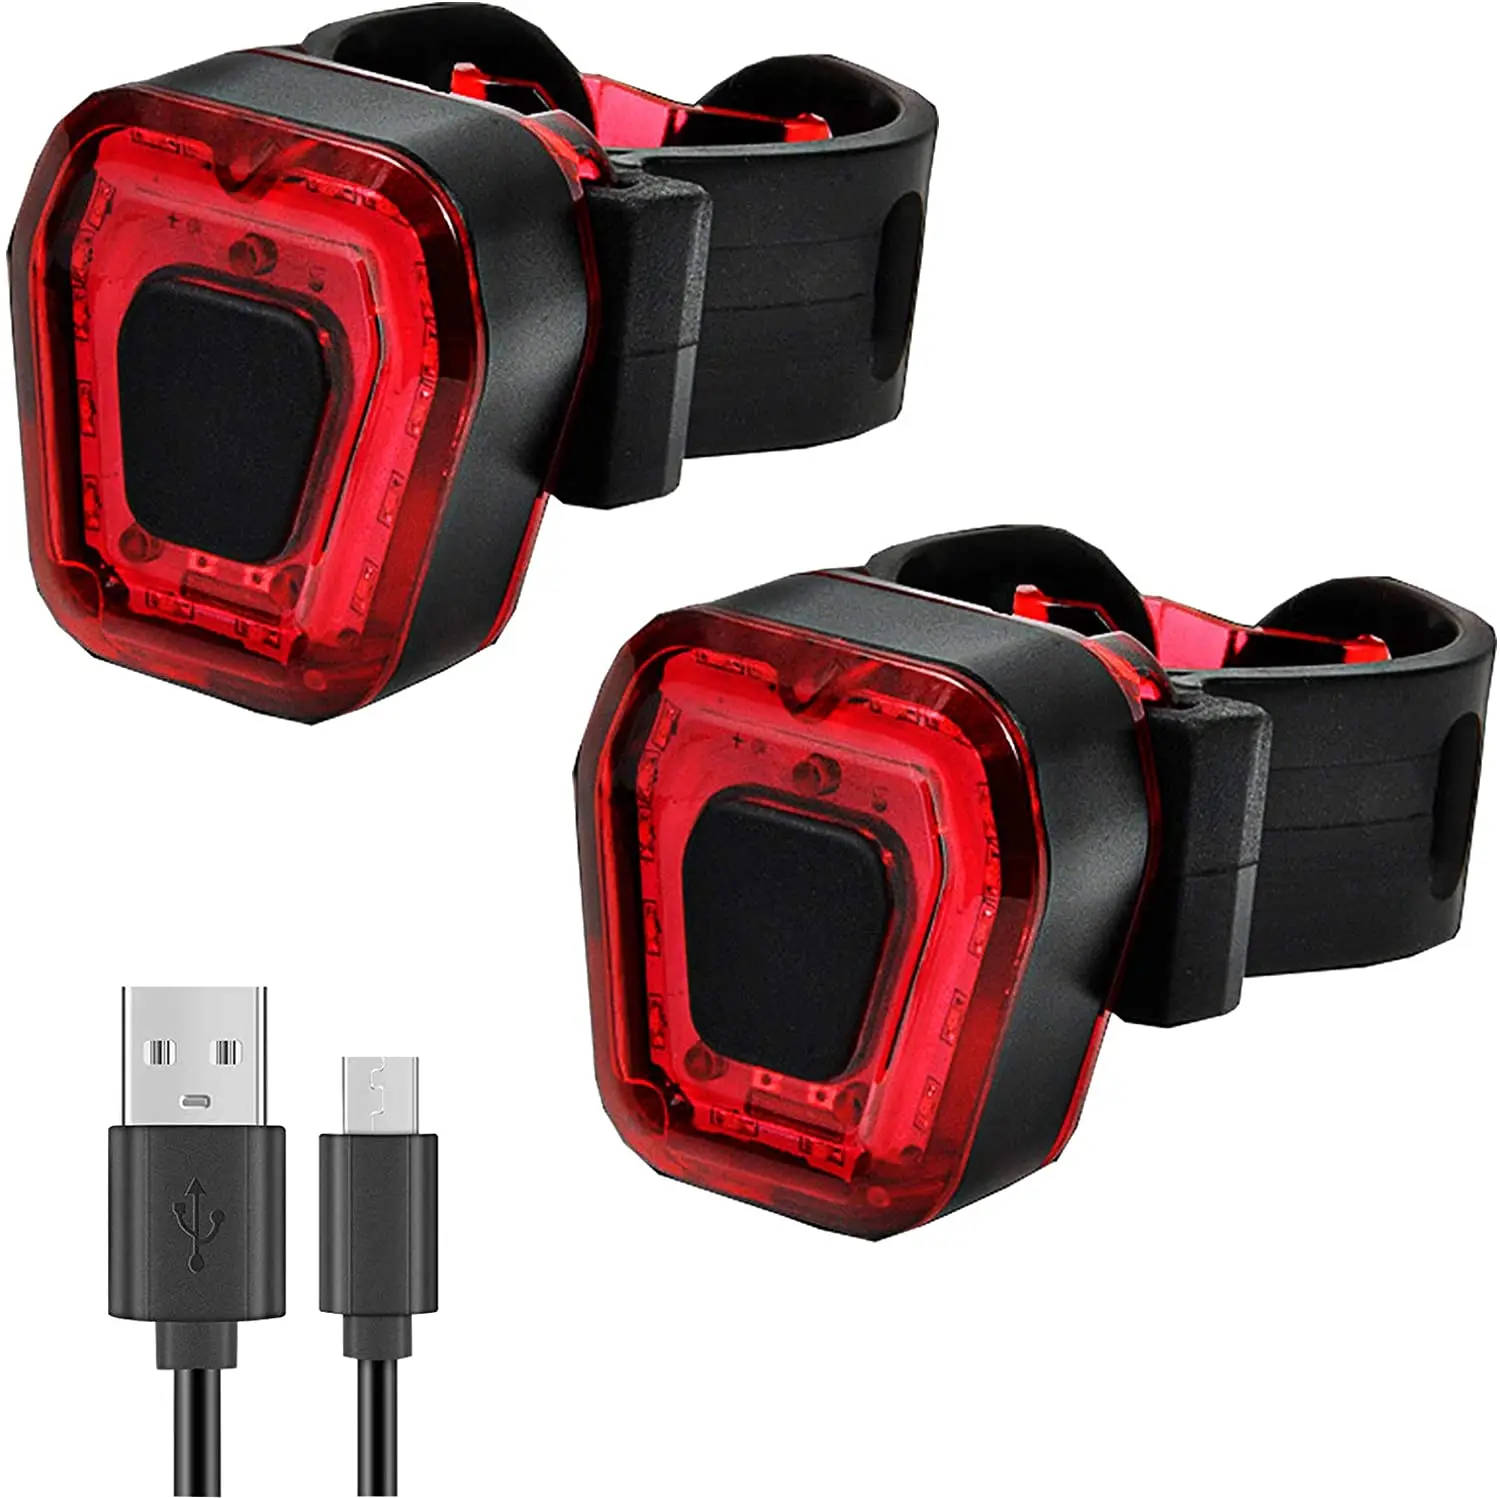 Waterproof Backpacks Road Bicycle HEDELE USB Rechargeable Bike Tail Light 2 Pack,Red High Intensity Led Accessories Fits On Any Bike or Helmet,5 Light Mode Fits All Mountain Bikes 